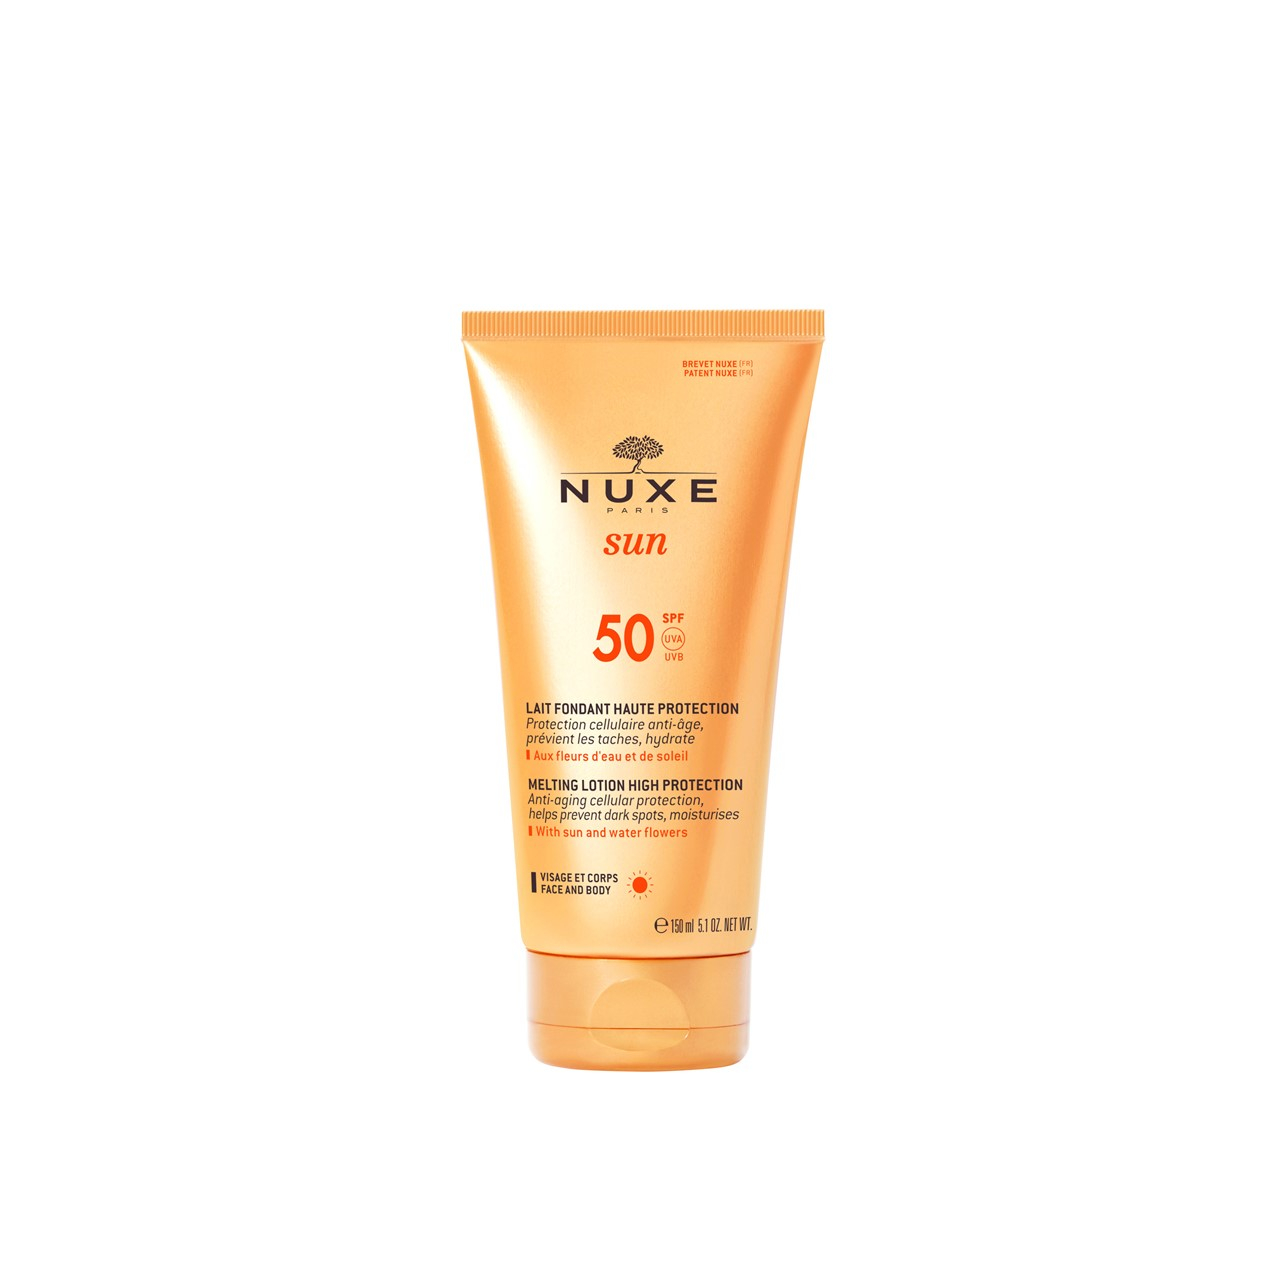 NUXE Sun Melting Lotion High Protection SPF50 150ml